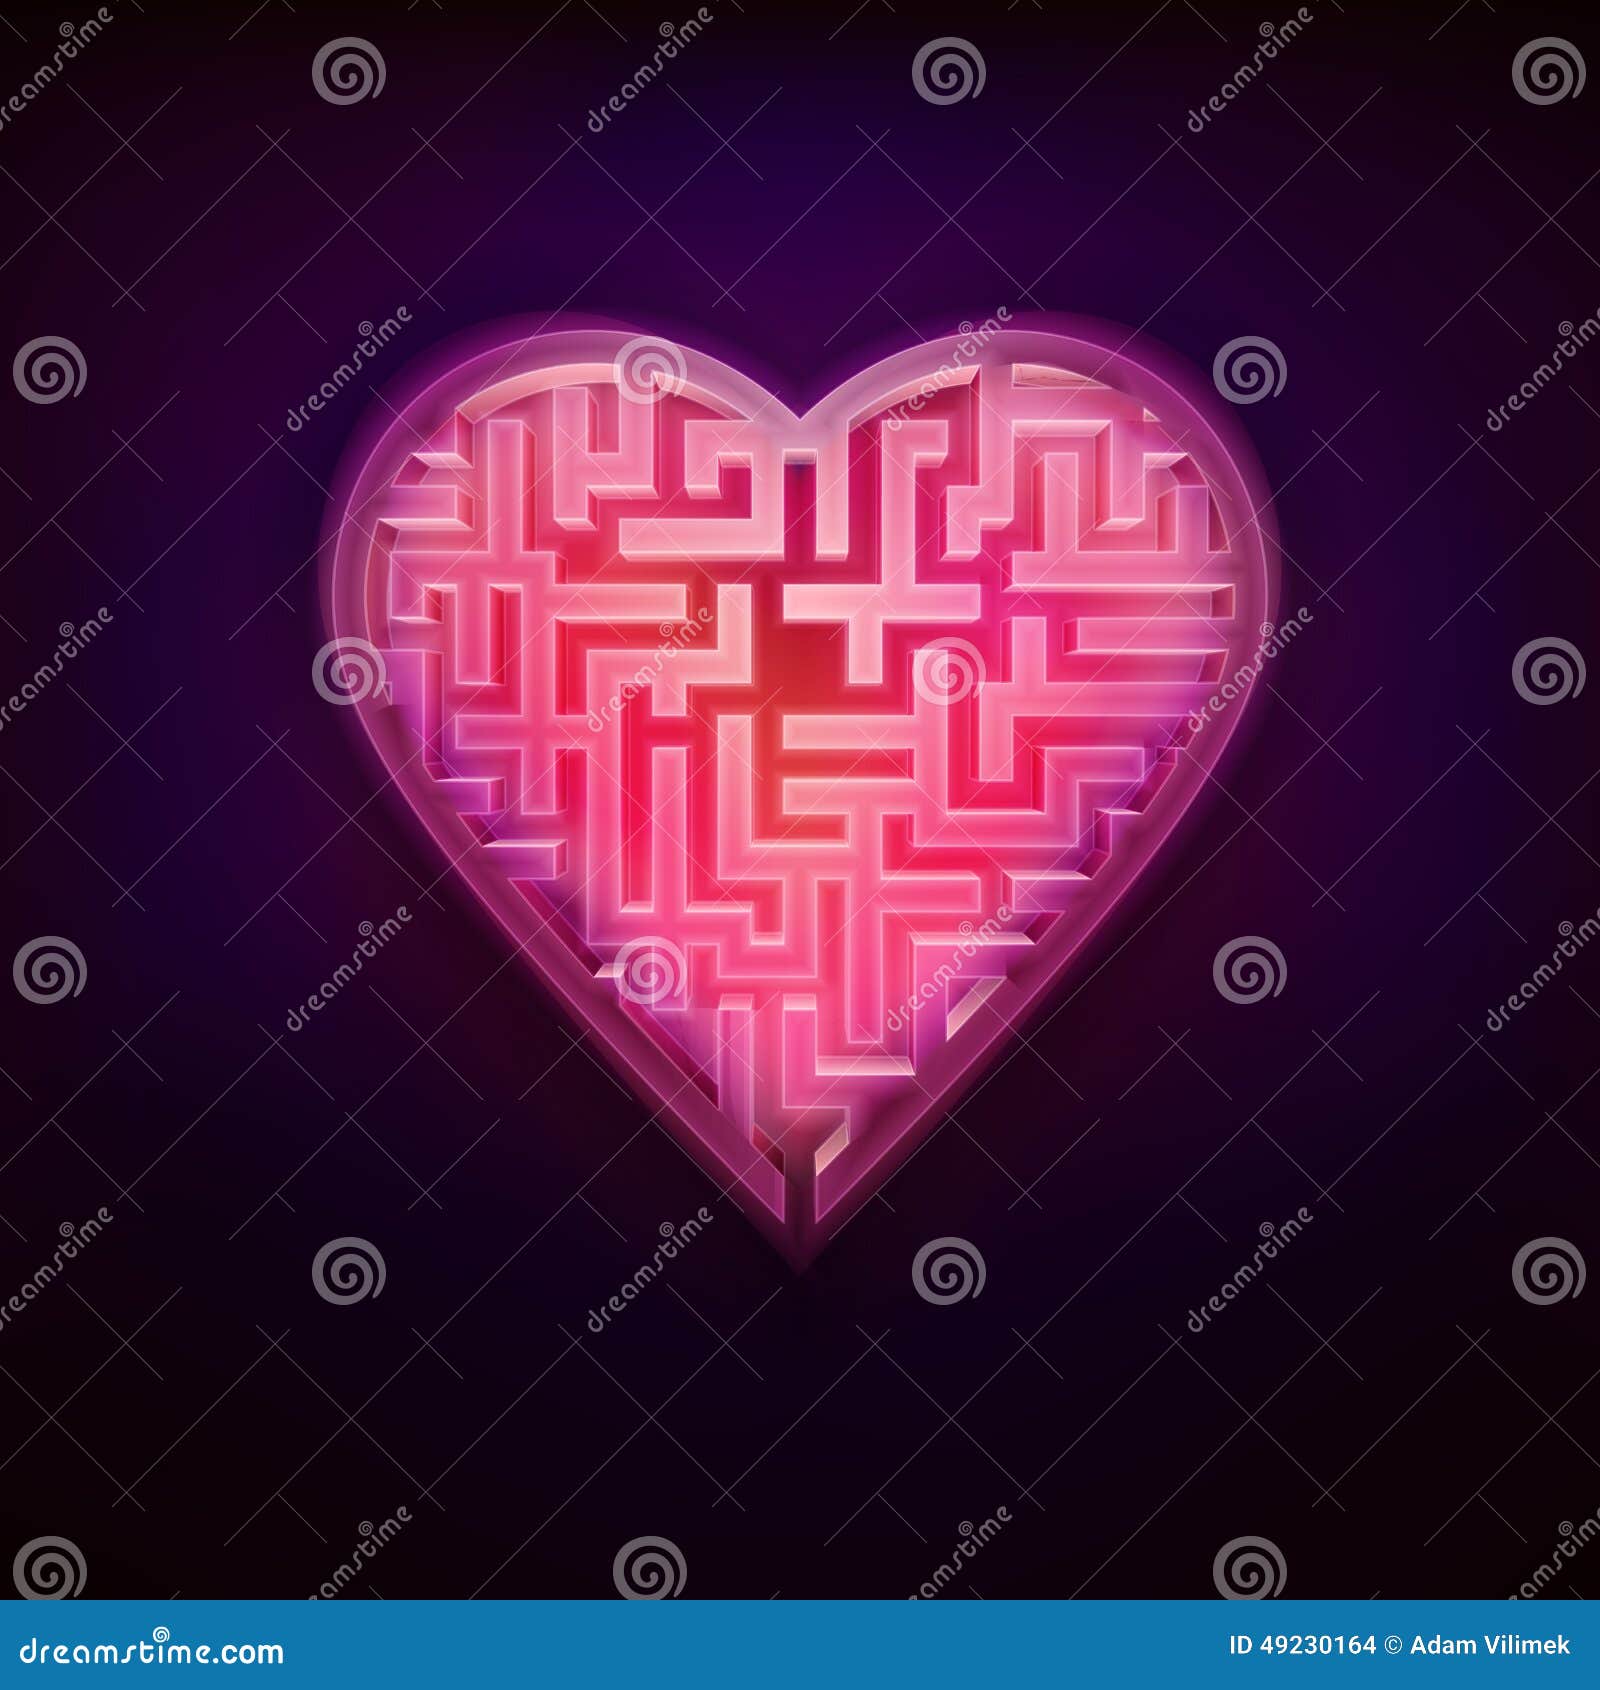 Red Maze Red Dreamstime Clipart – Illustrations, Stock & 6,247 Stock Illustrations - Vectors Maze